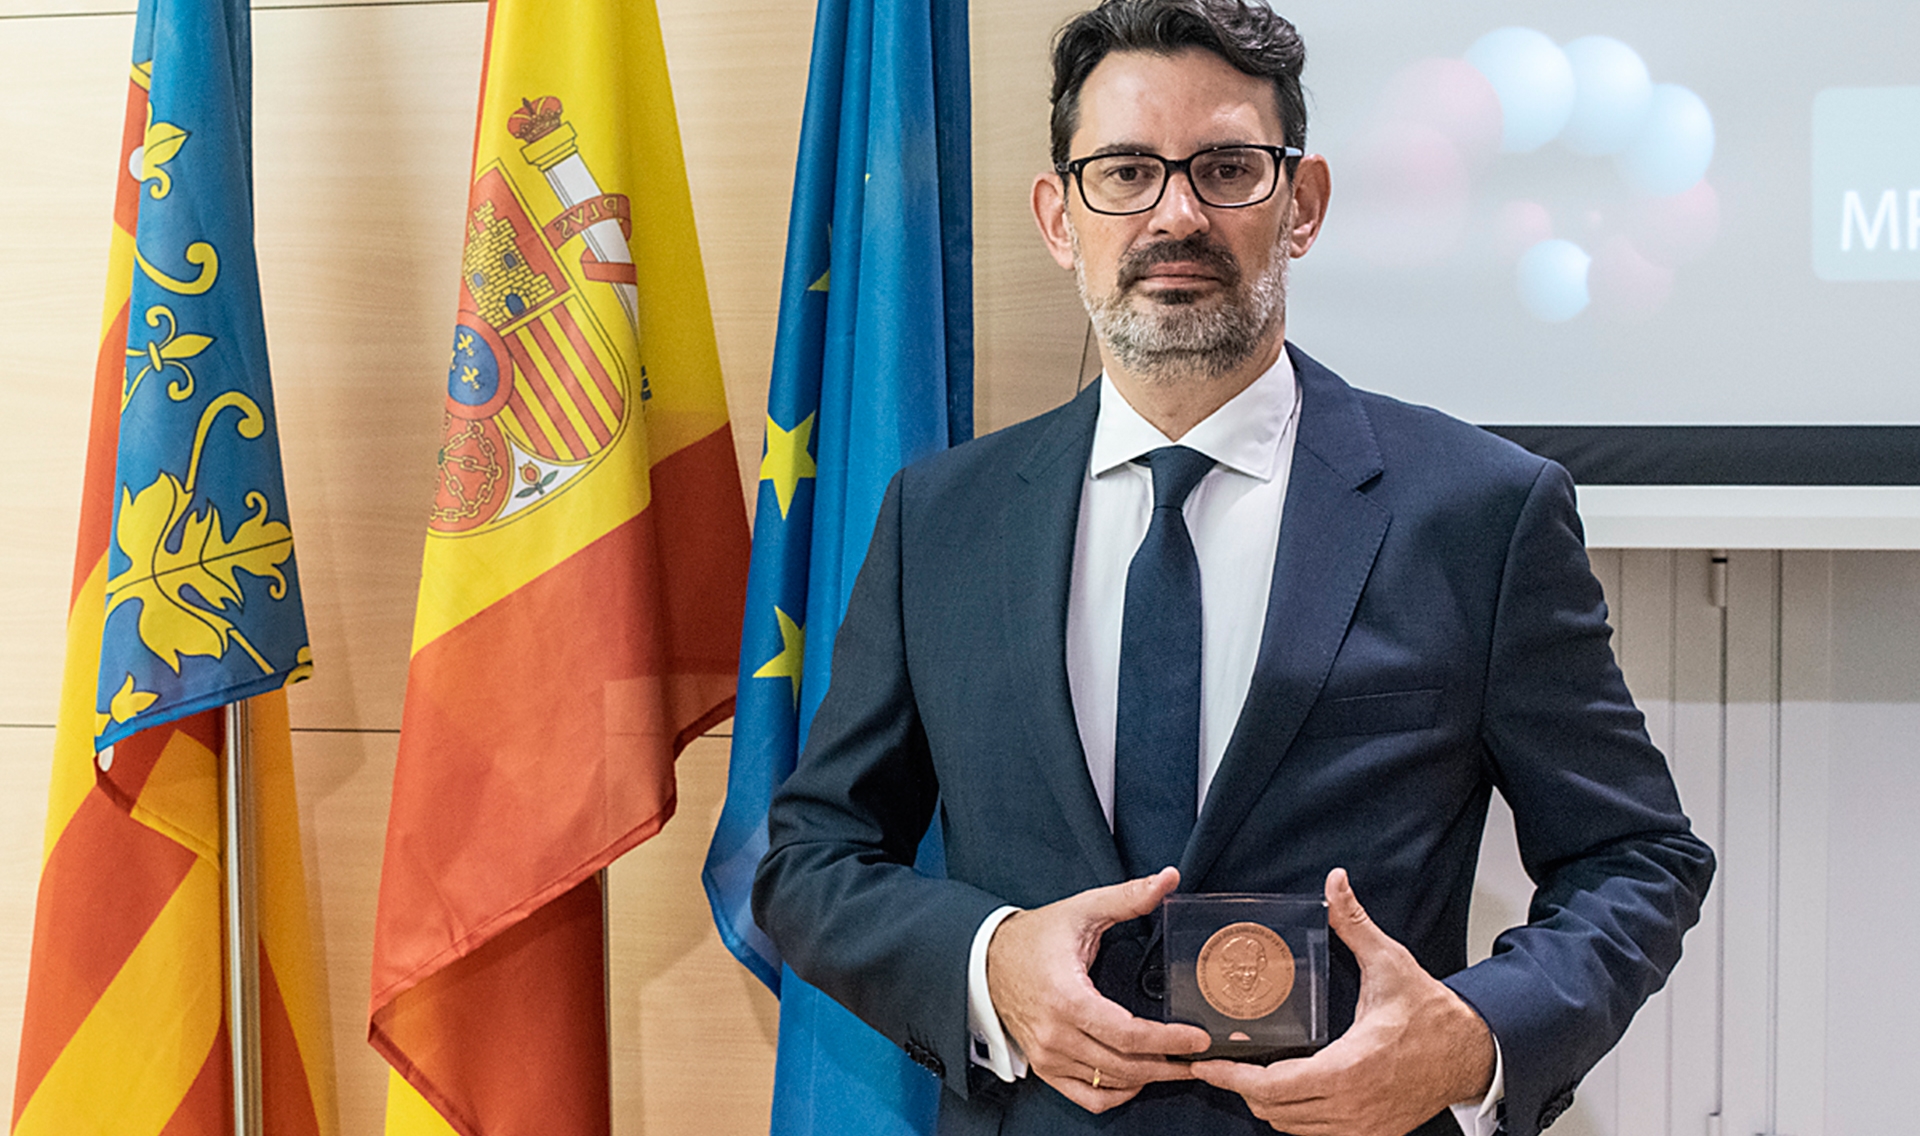 Oscar Marin holding award in front of national and EU flags